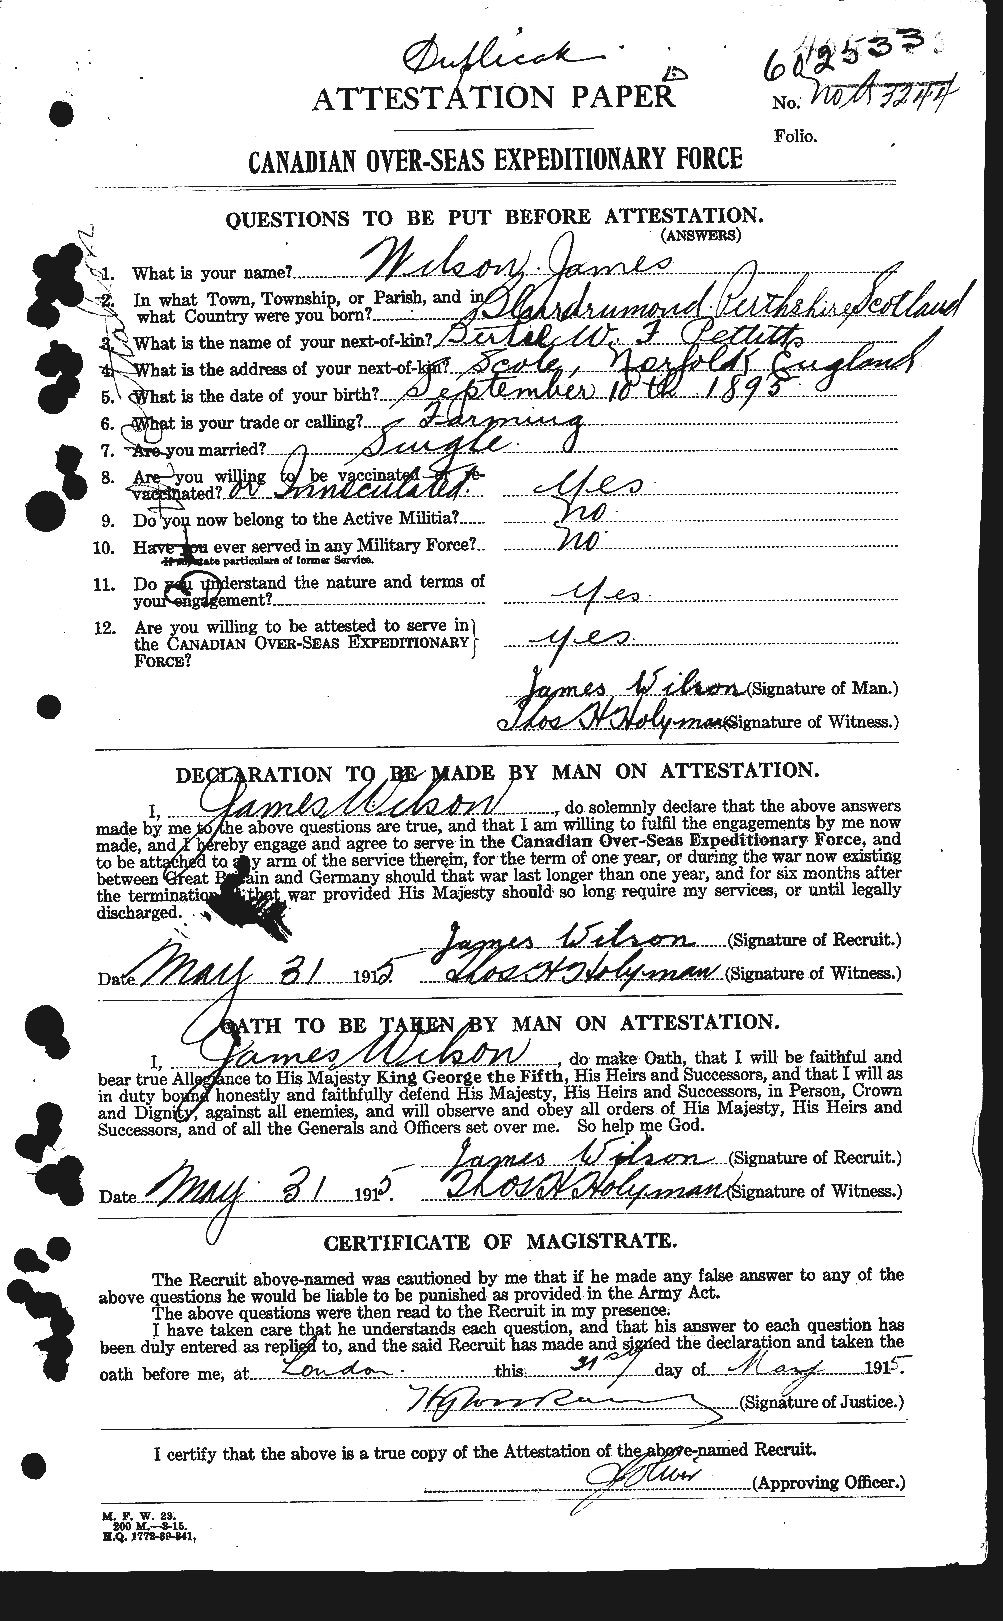 Personnel Records of the First World War - CEF 681336a